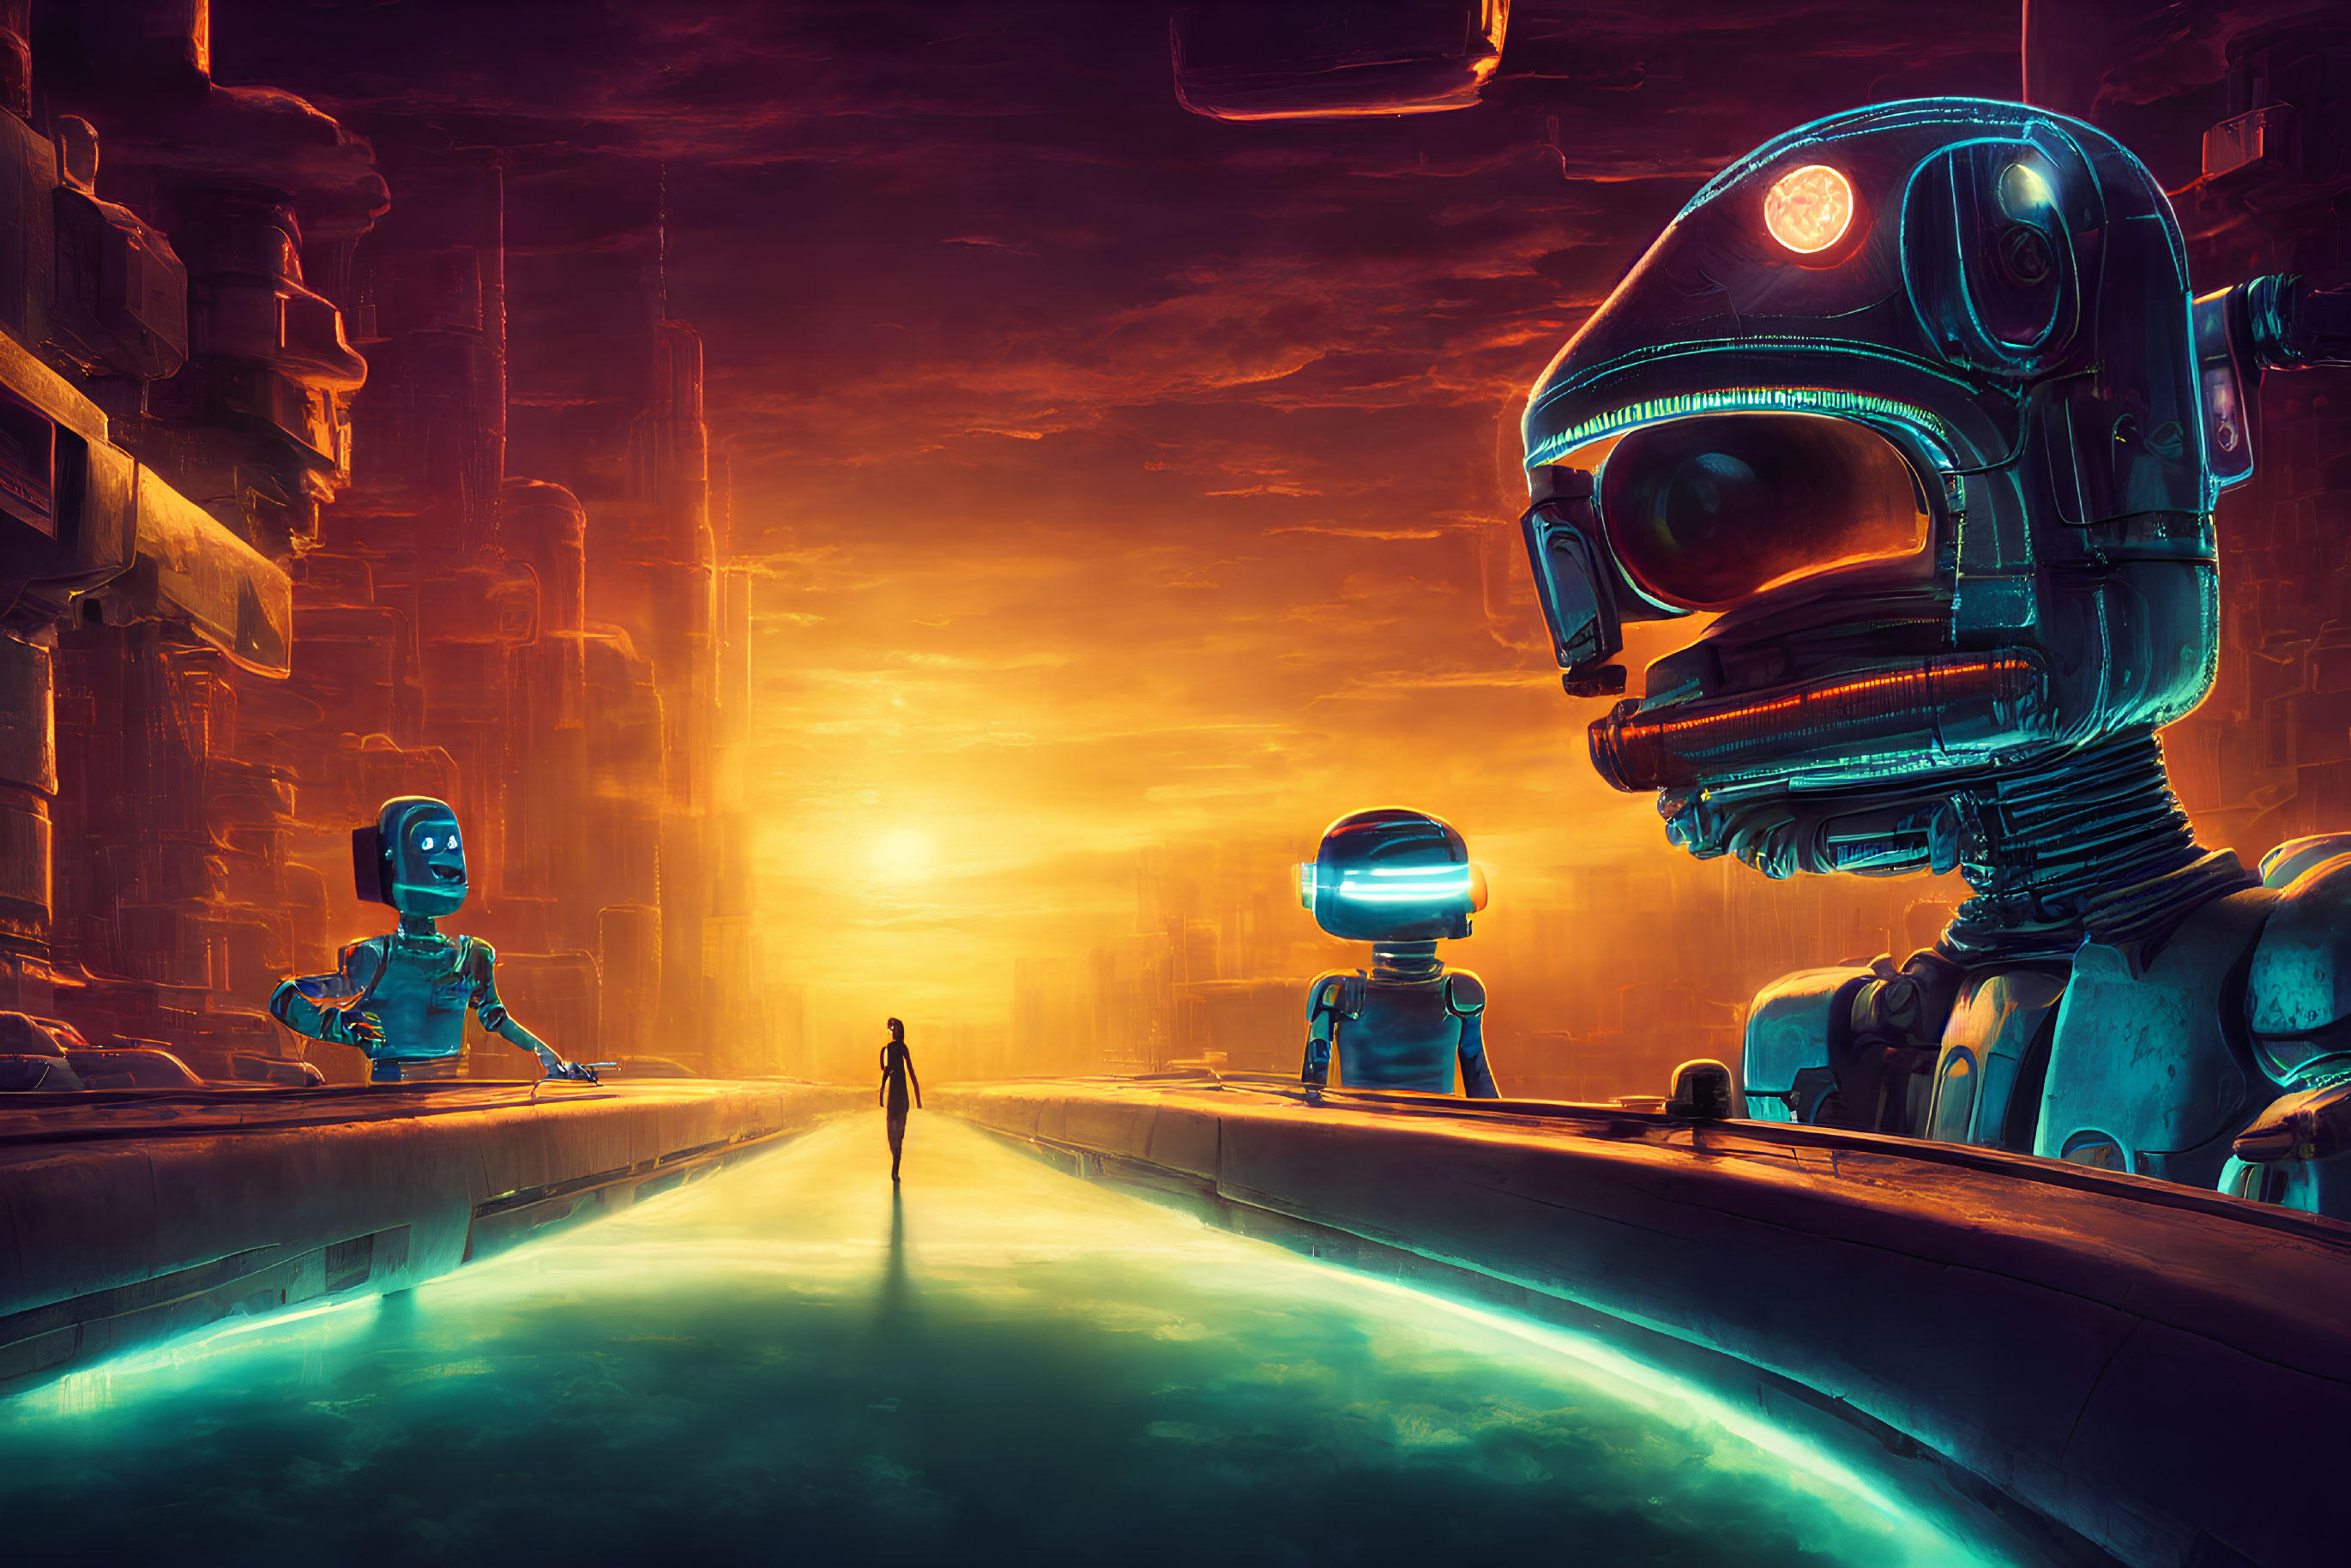 Futuristic cityscape at sunset with robots and human figure by turquoise canal